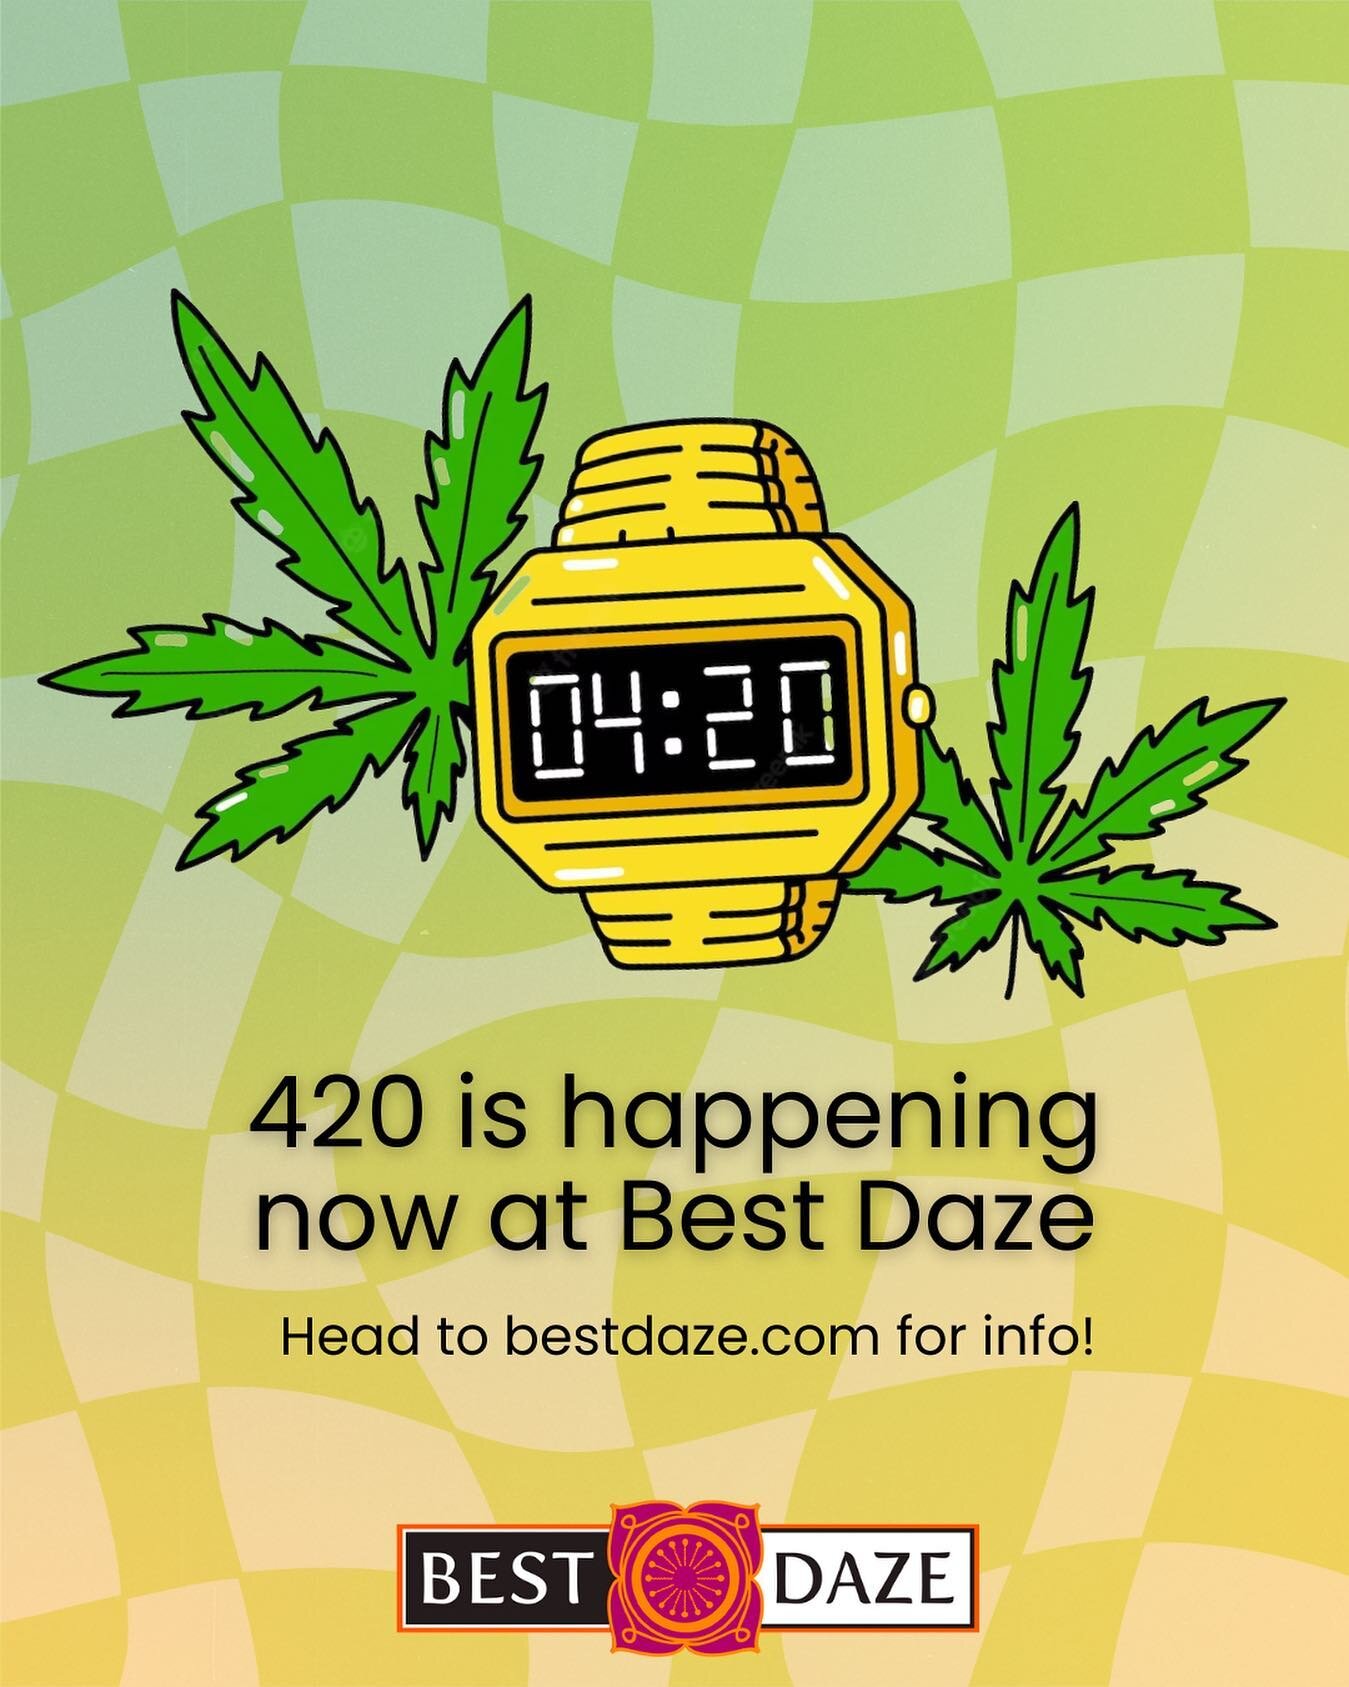 Ready for 420? Head to bestdaze.com!

For educational purposes only 🤓
Please consume responsibly 😊 For adult use 21+ only